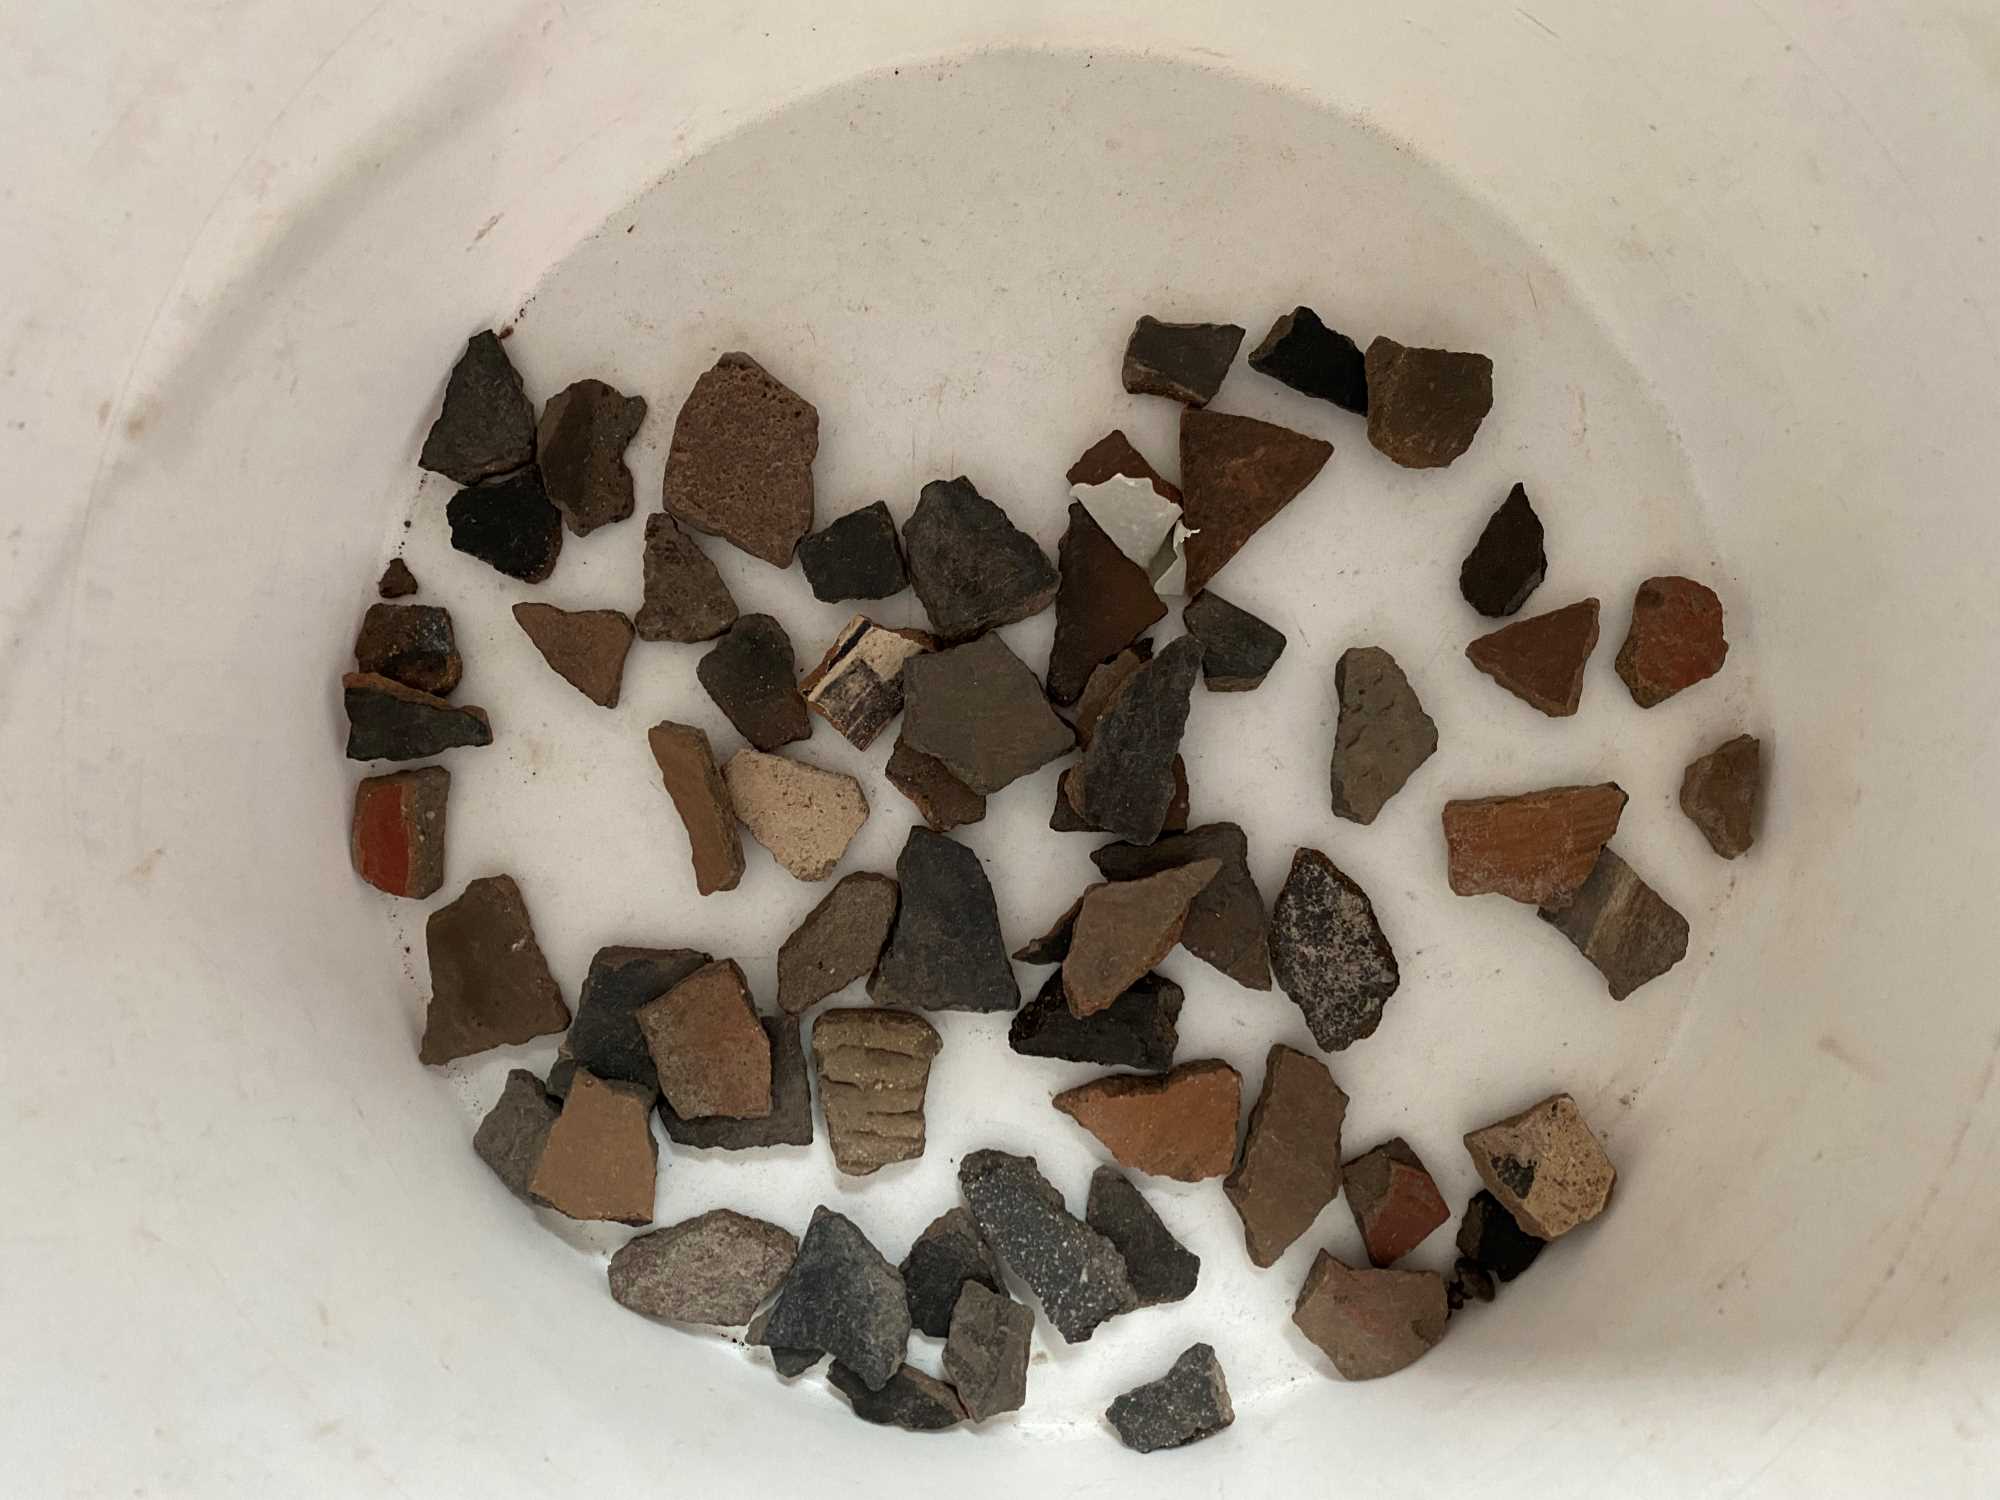 Sherds smaller than a quarter that we sorted out during a lab.